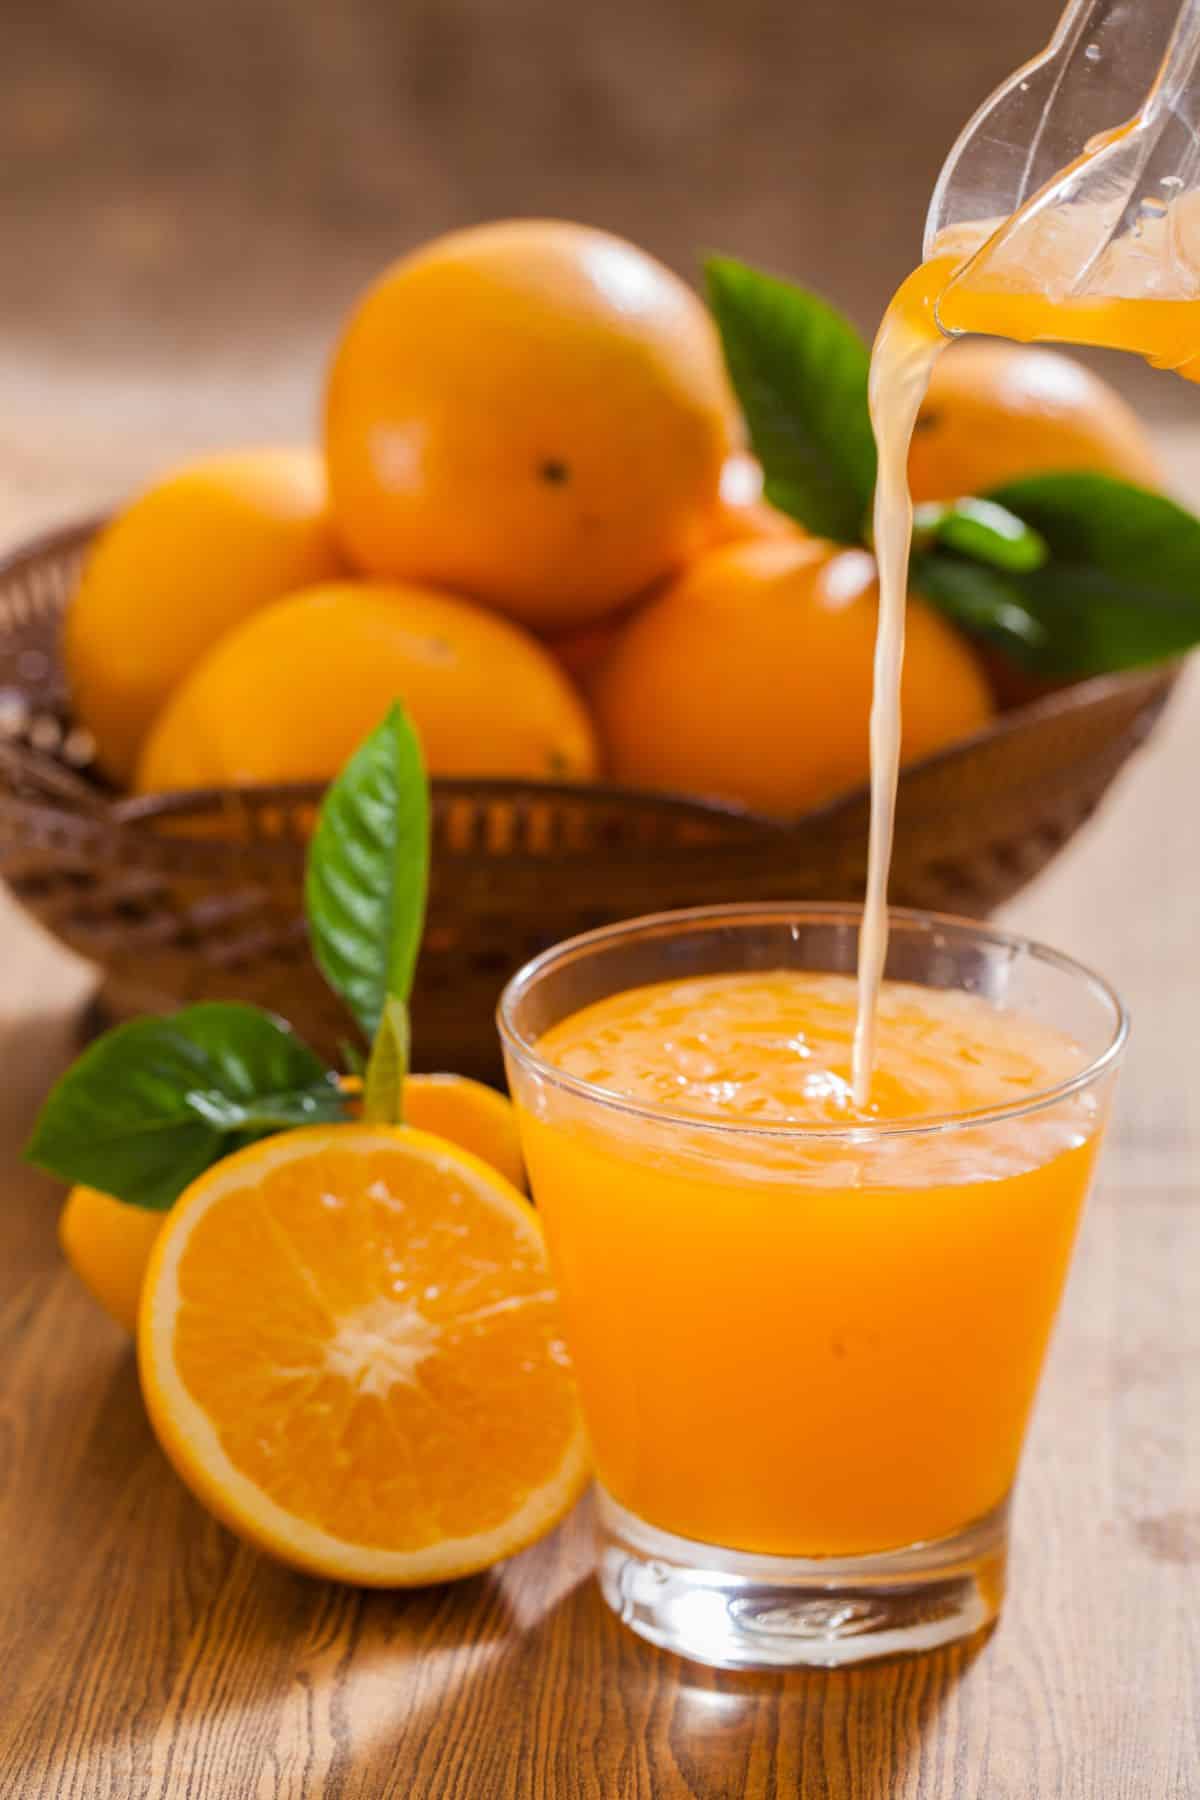 a glass of orange juice being poured in front of a bowl of oranges.